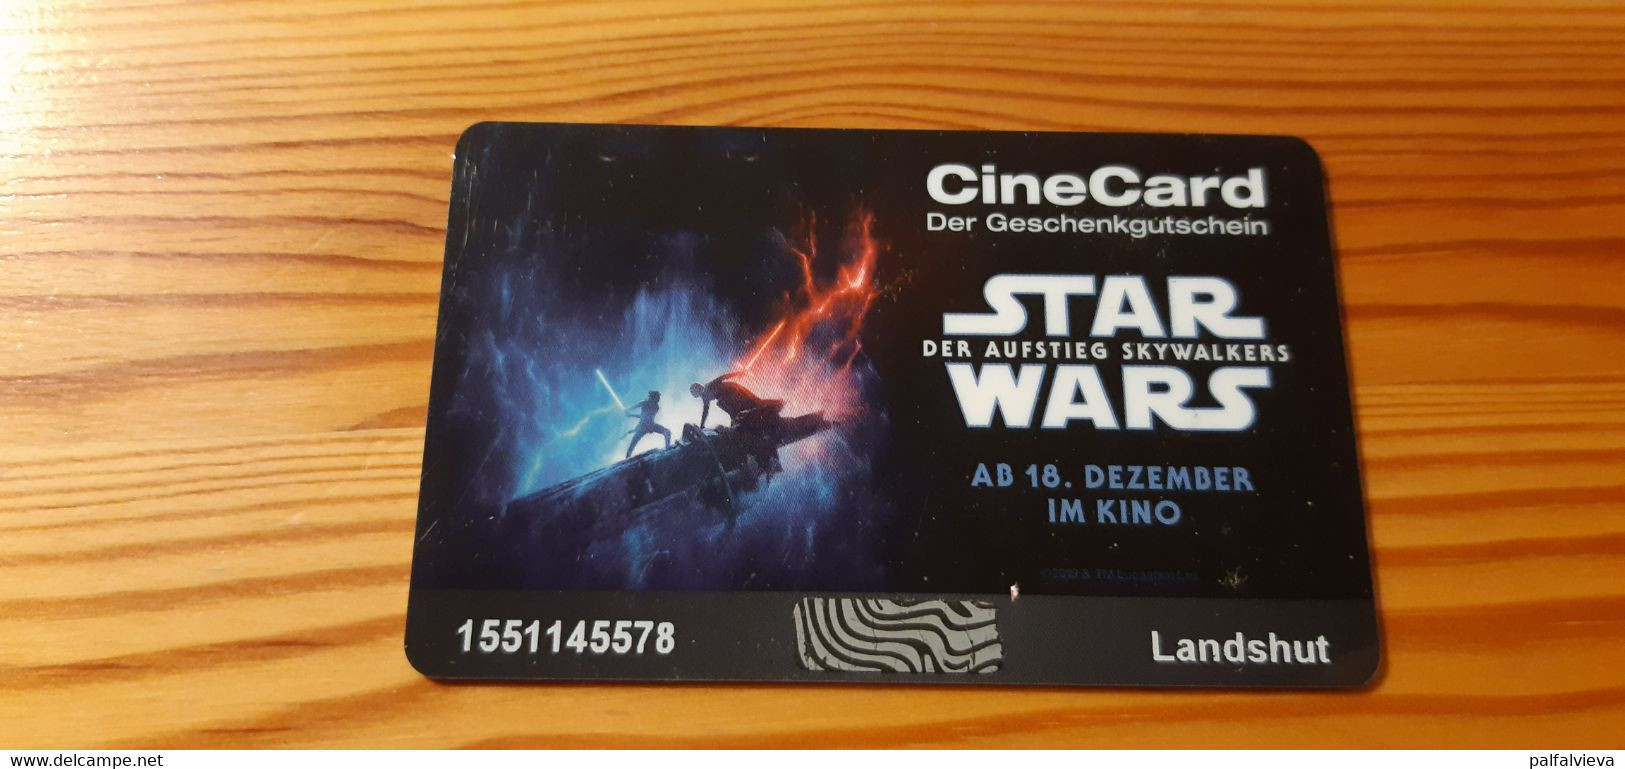 CineCard Gift Card Germany - Star Wars - Gift Cards